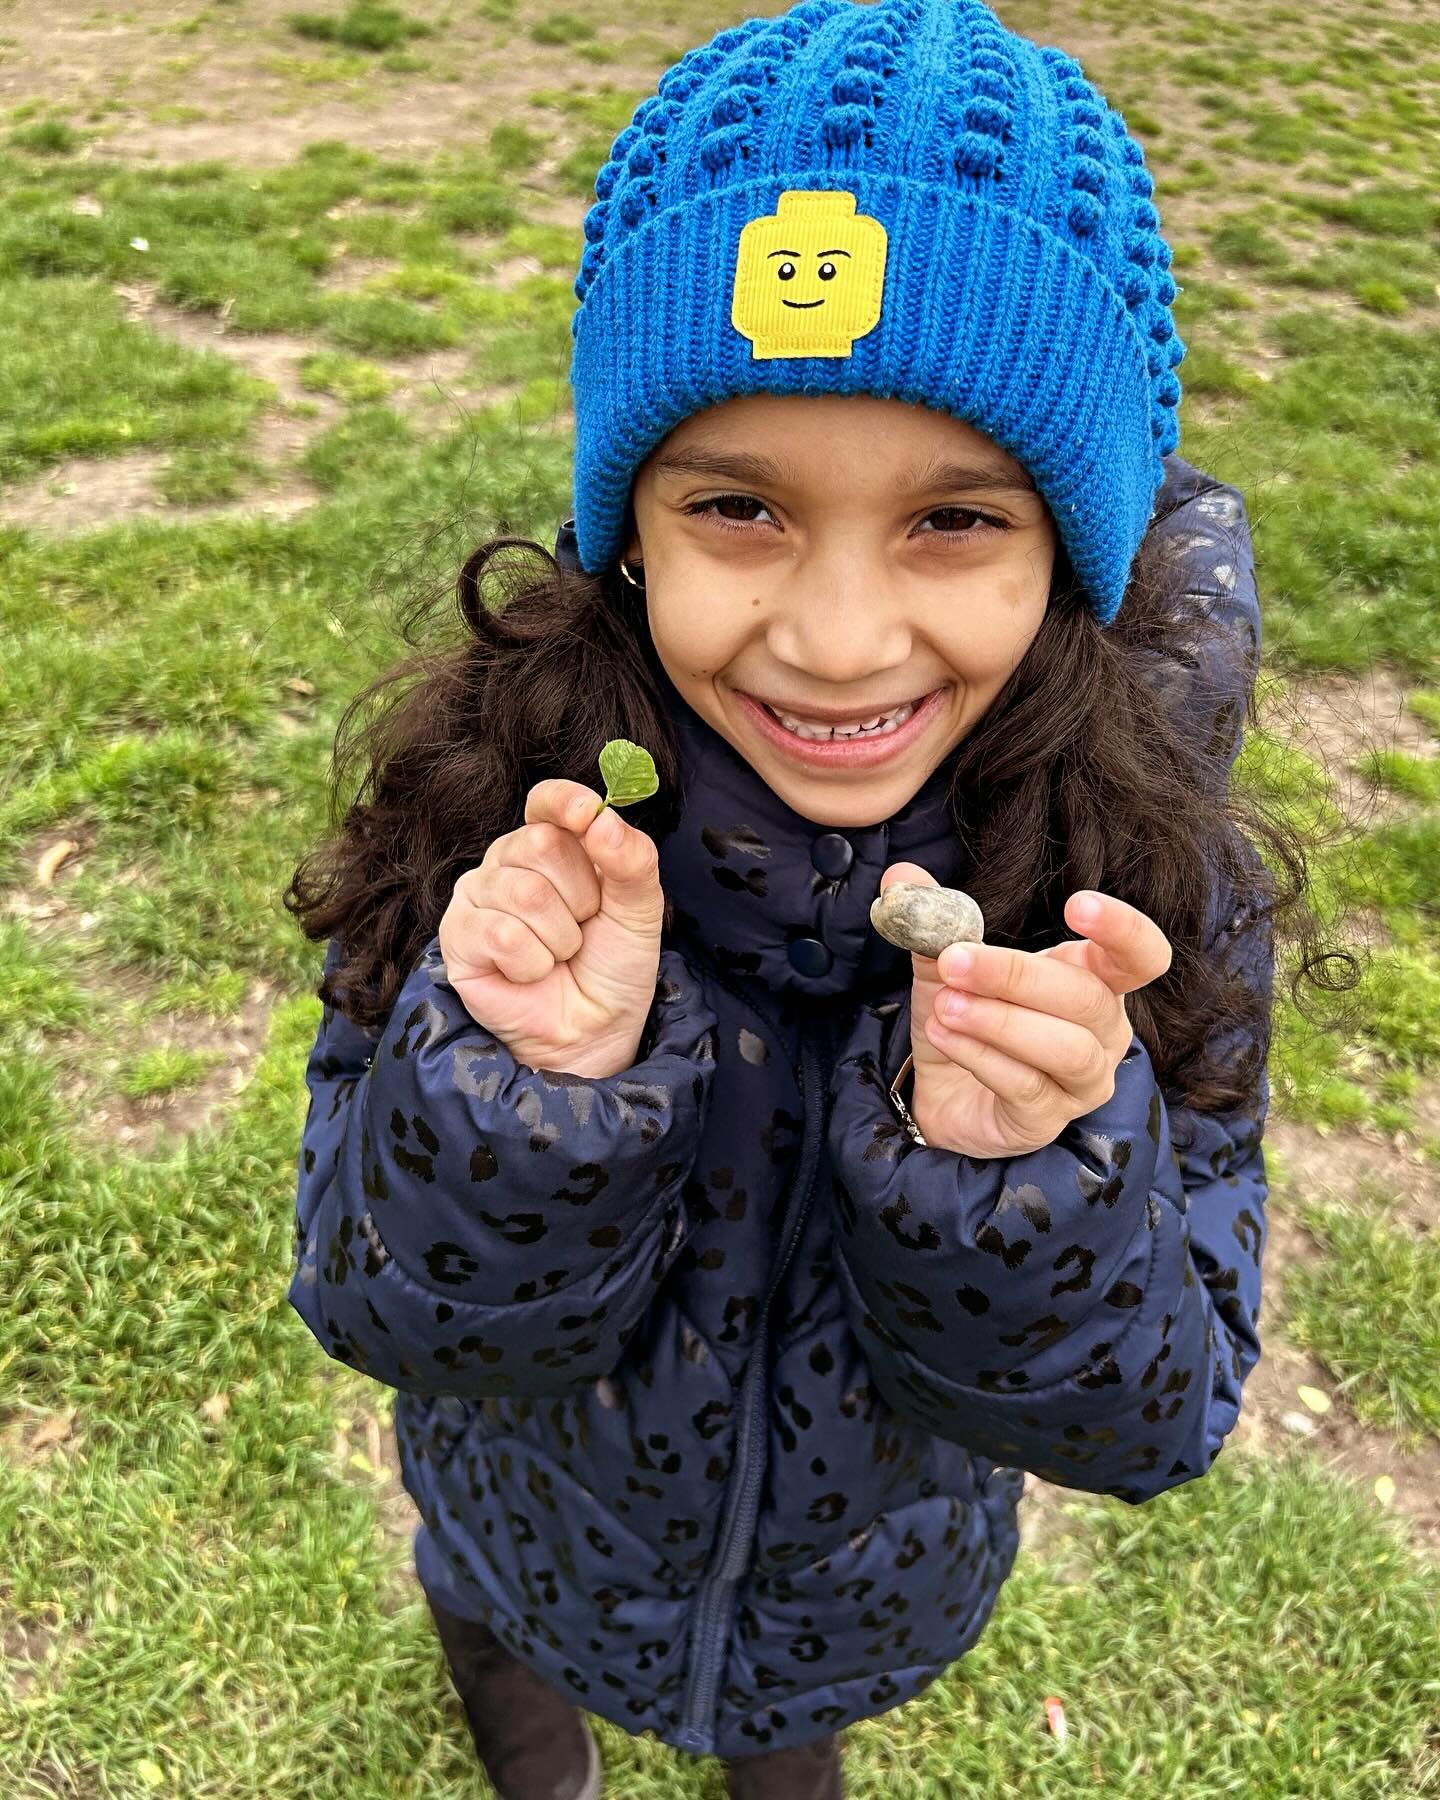 We are on spring recess this week, but our First Grade kiddos made sure to celebrate #EarthDay this past Friday with a trip to @fortgreenepark to notice and note all the wonderful pieces of nature they could find! 🌳
.
We love seeing the ways our stu